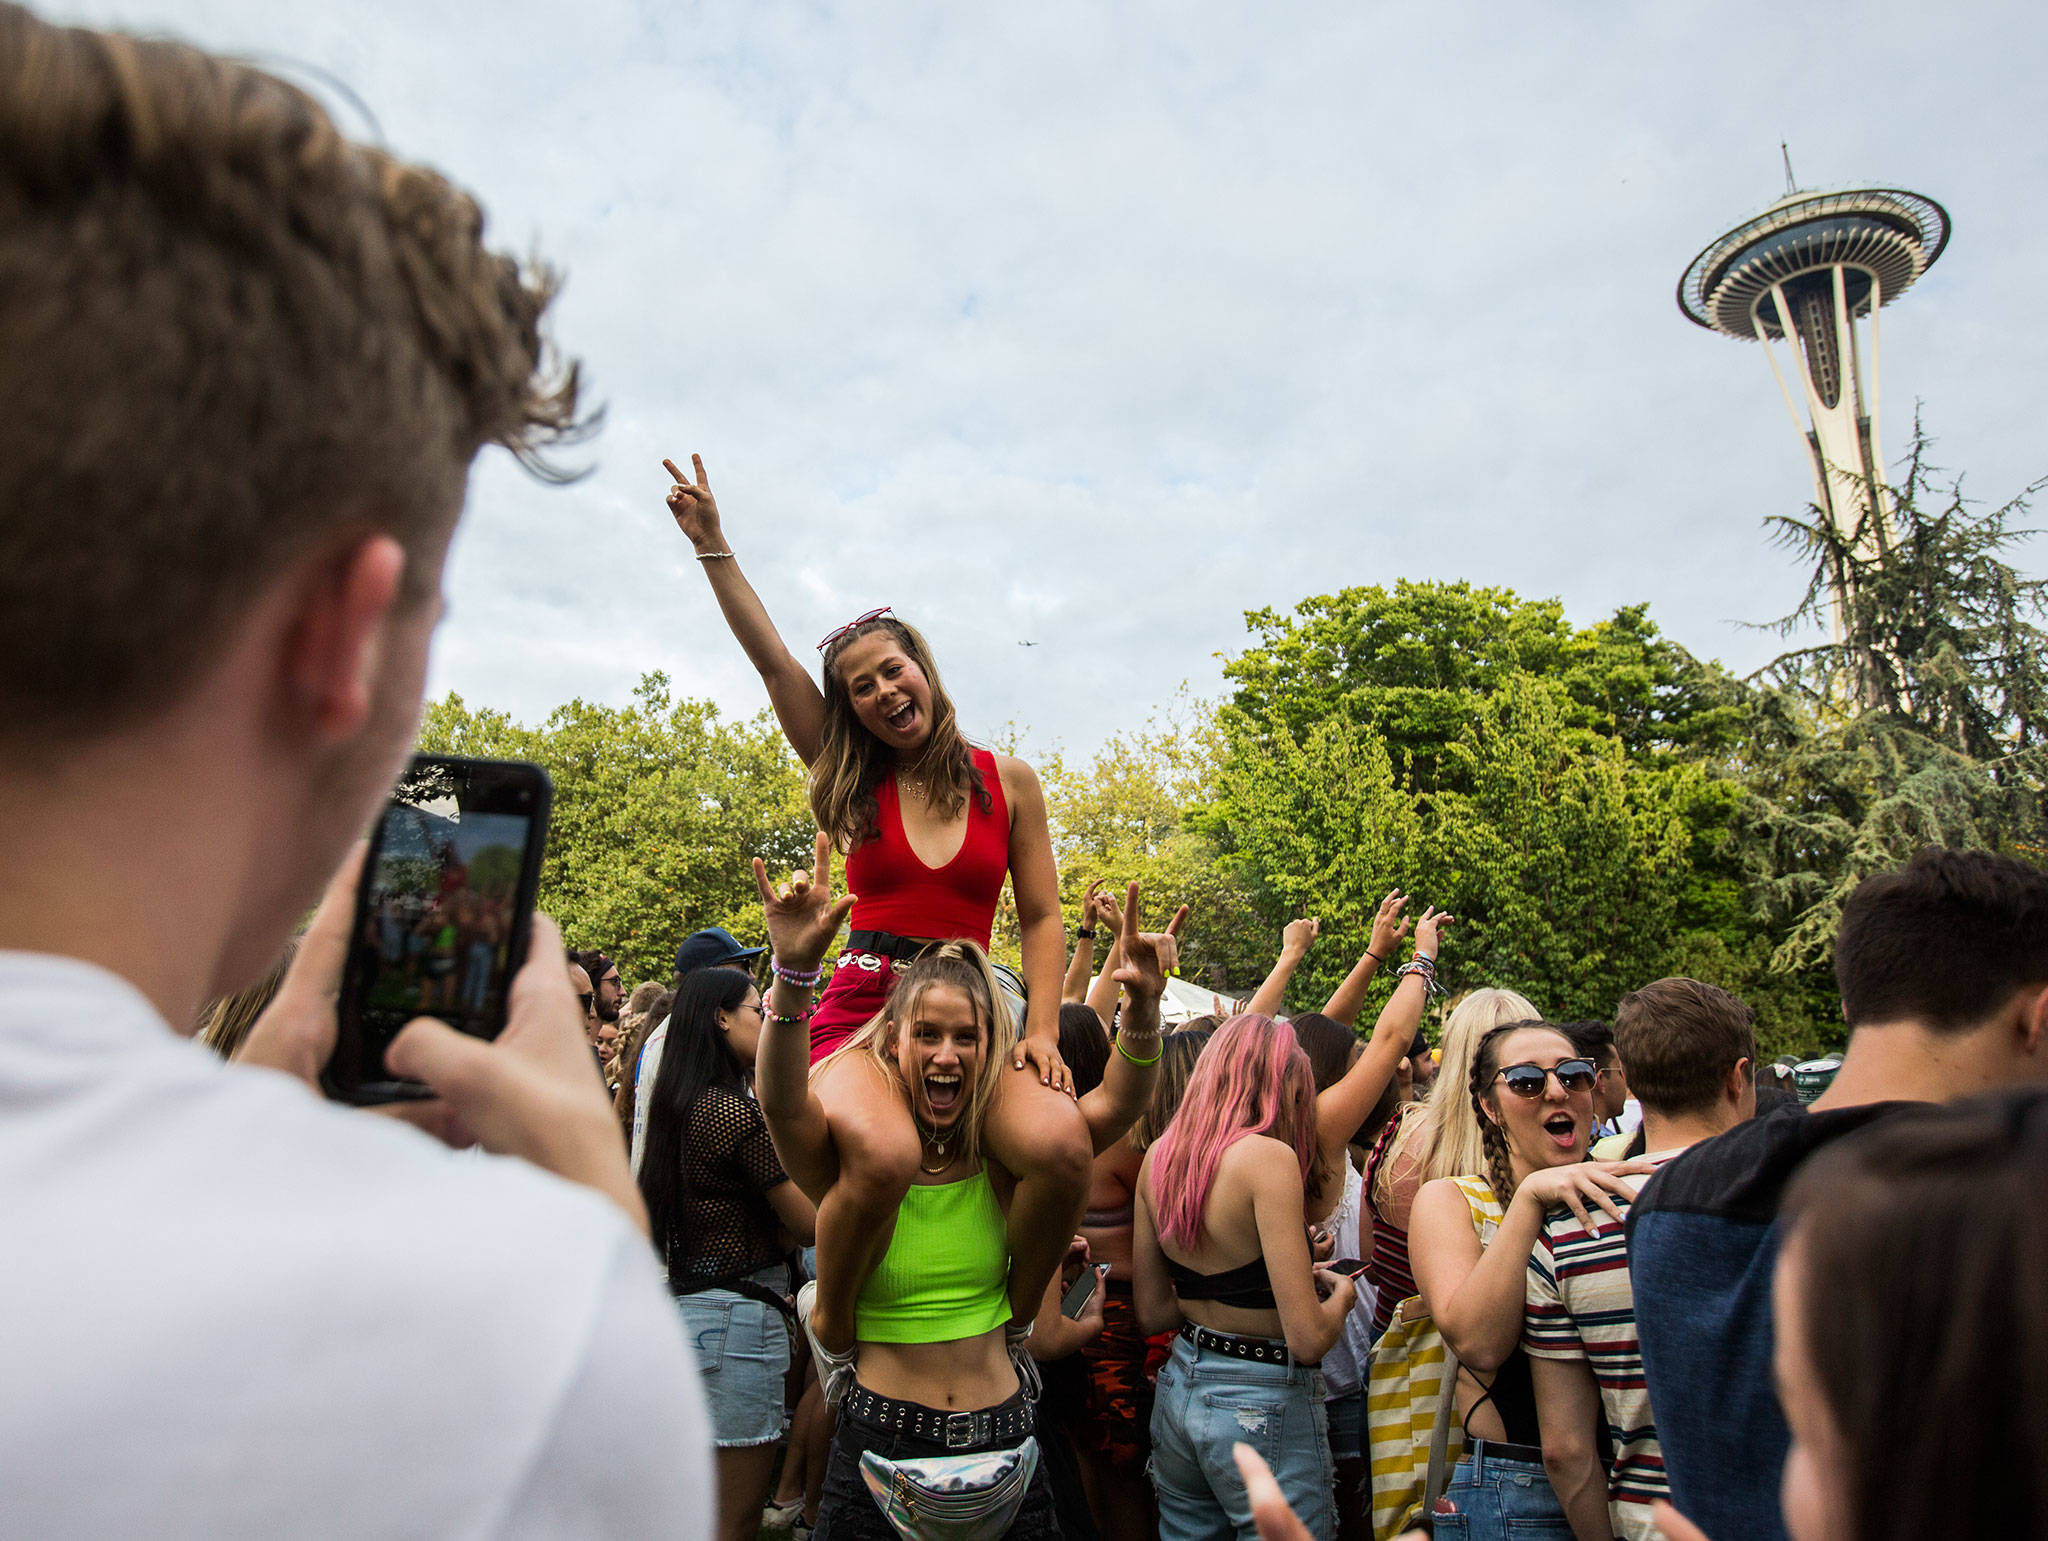 Two girls have their photo taken during Sol’s performance at Bumbershoot Music & Arts Festival on Friday, Aug. 30, 2019 in Seattle, Wash. (Olivia Vanni / The Herald)